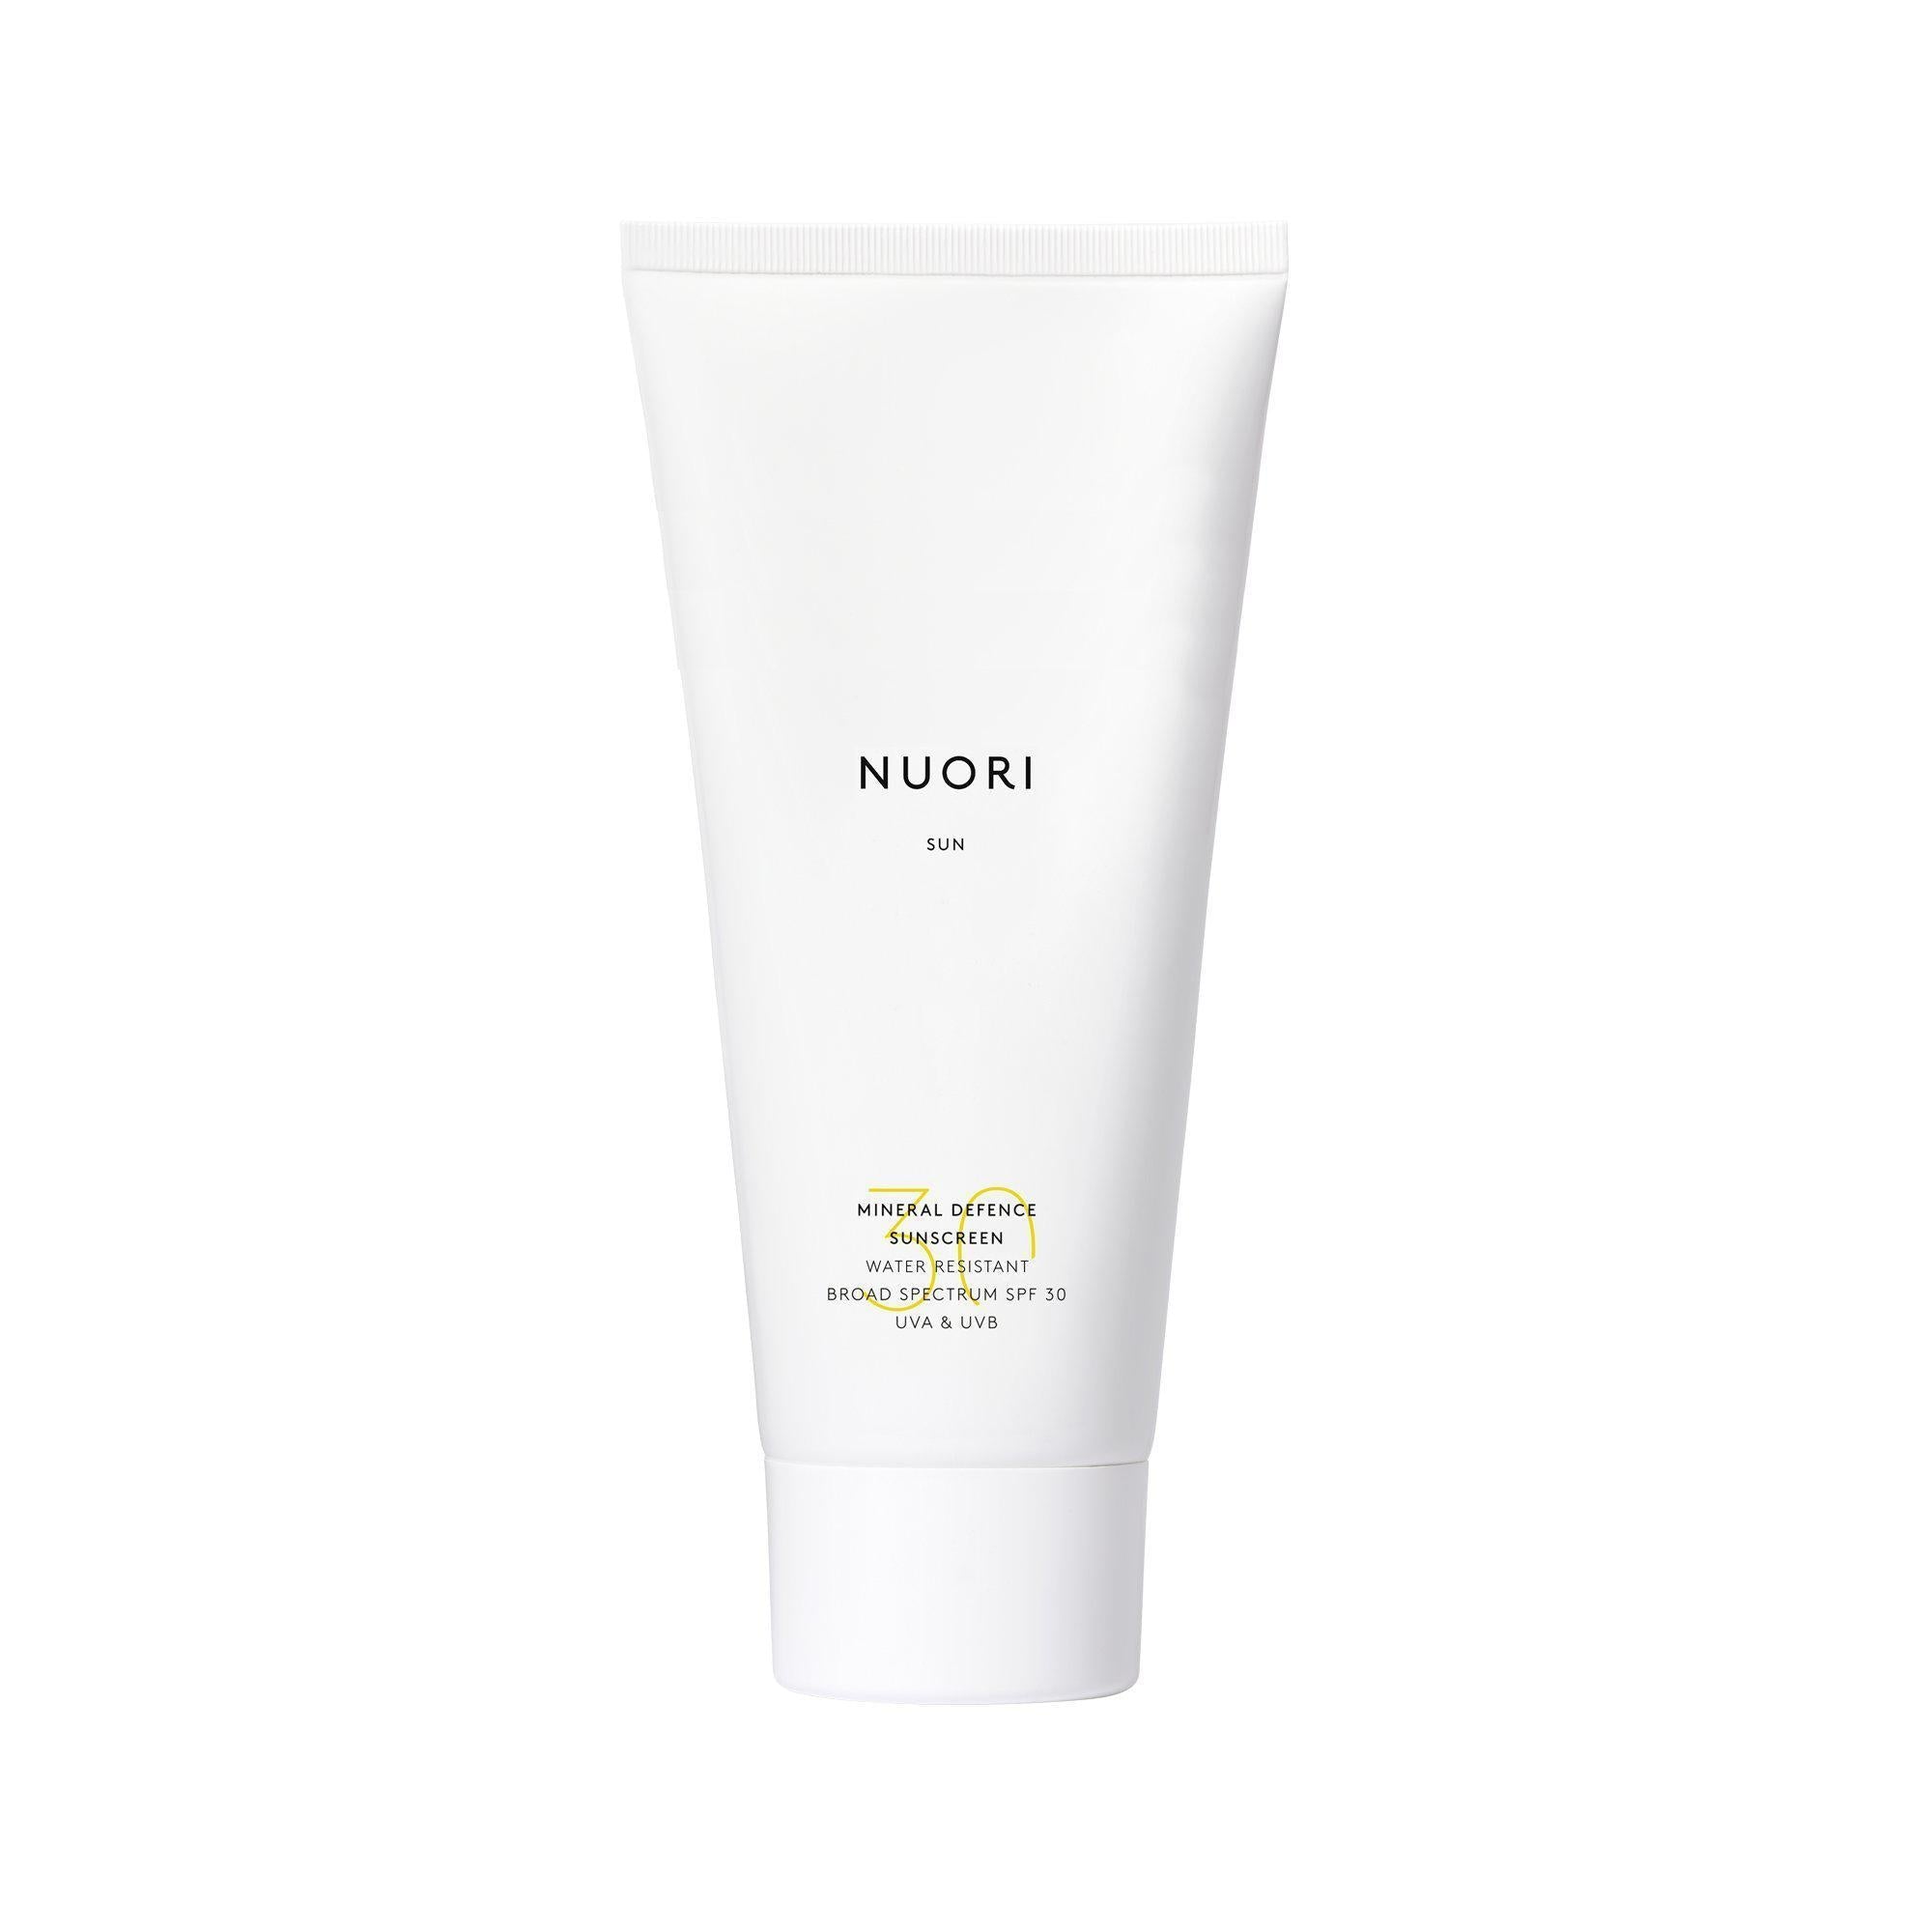 Indisponible - Crème Solaire Waterproof SPF 30 Mineral Defence Indisponible - Crème Solaire Waterproof SPF 30 Mineral Defence - Nuori